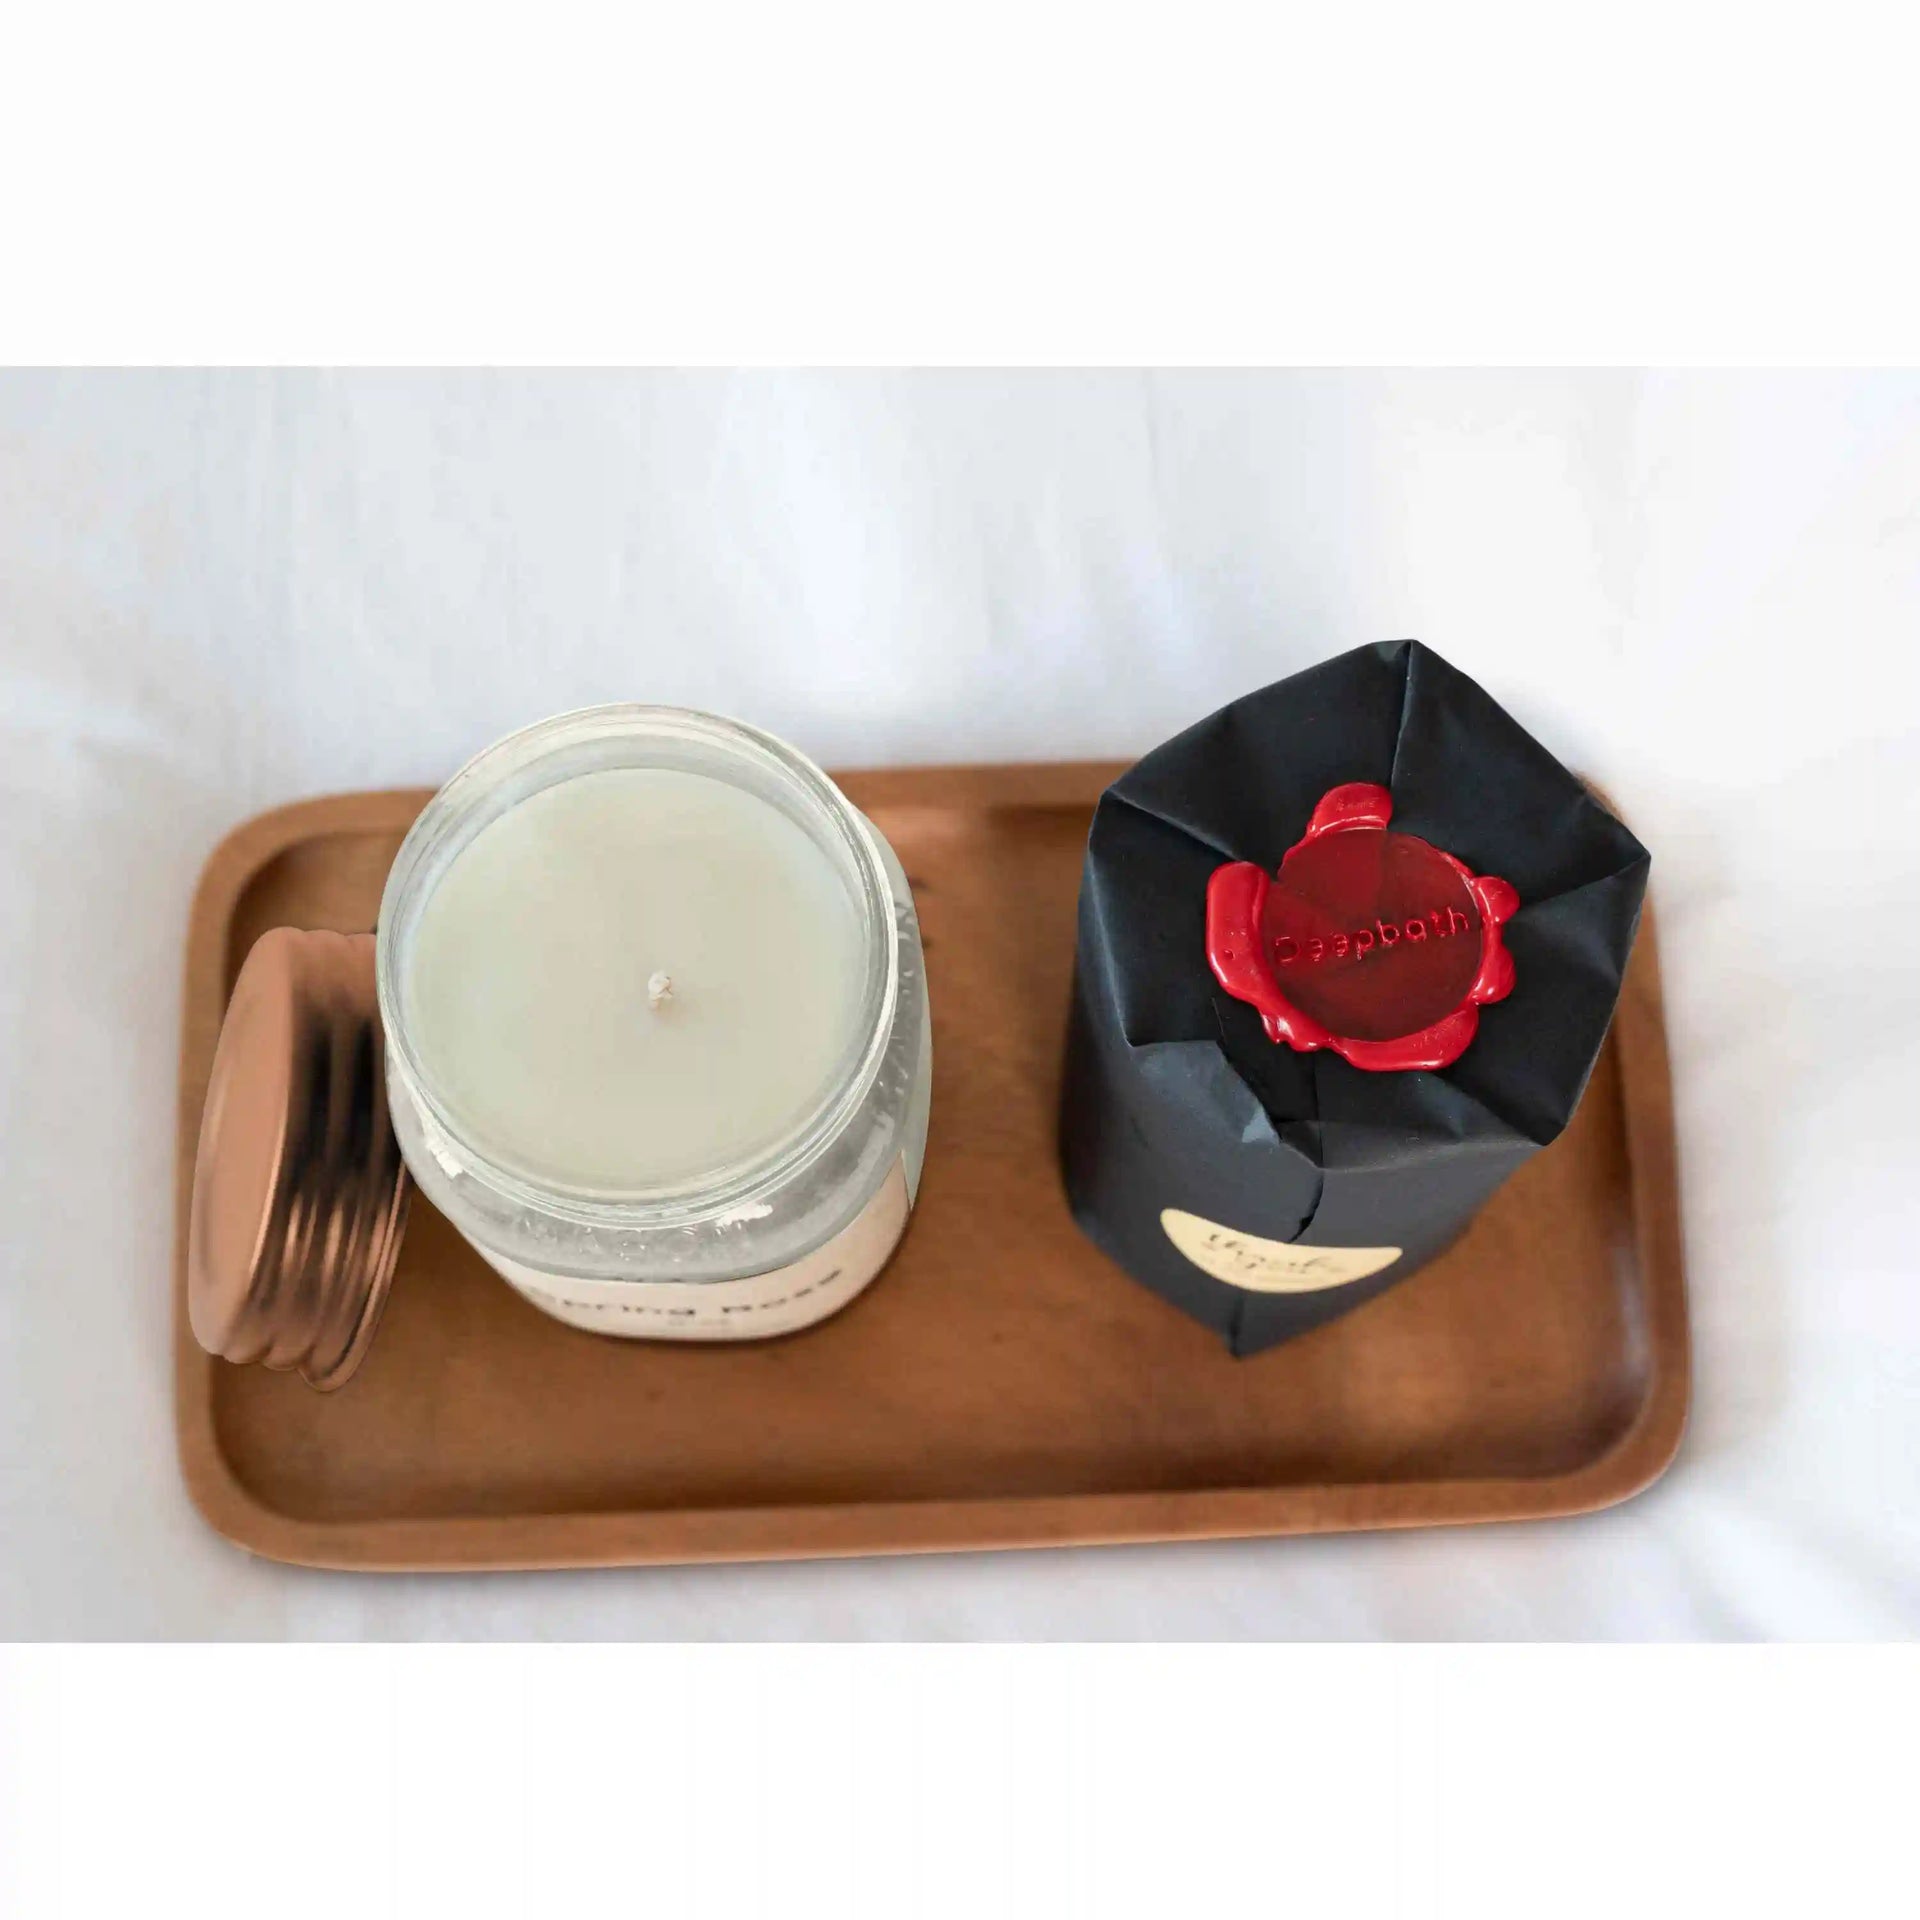 scented-candle-uae-roasted-coffee-2